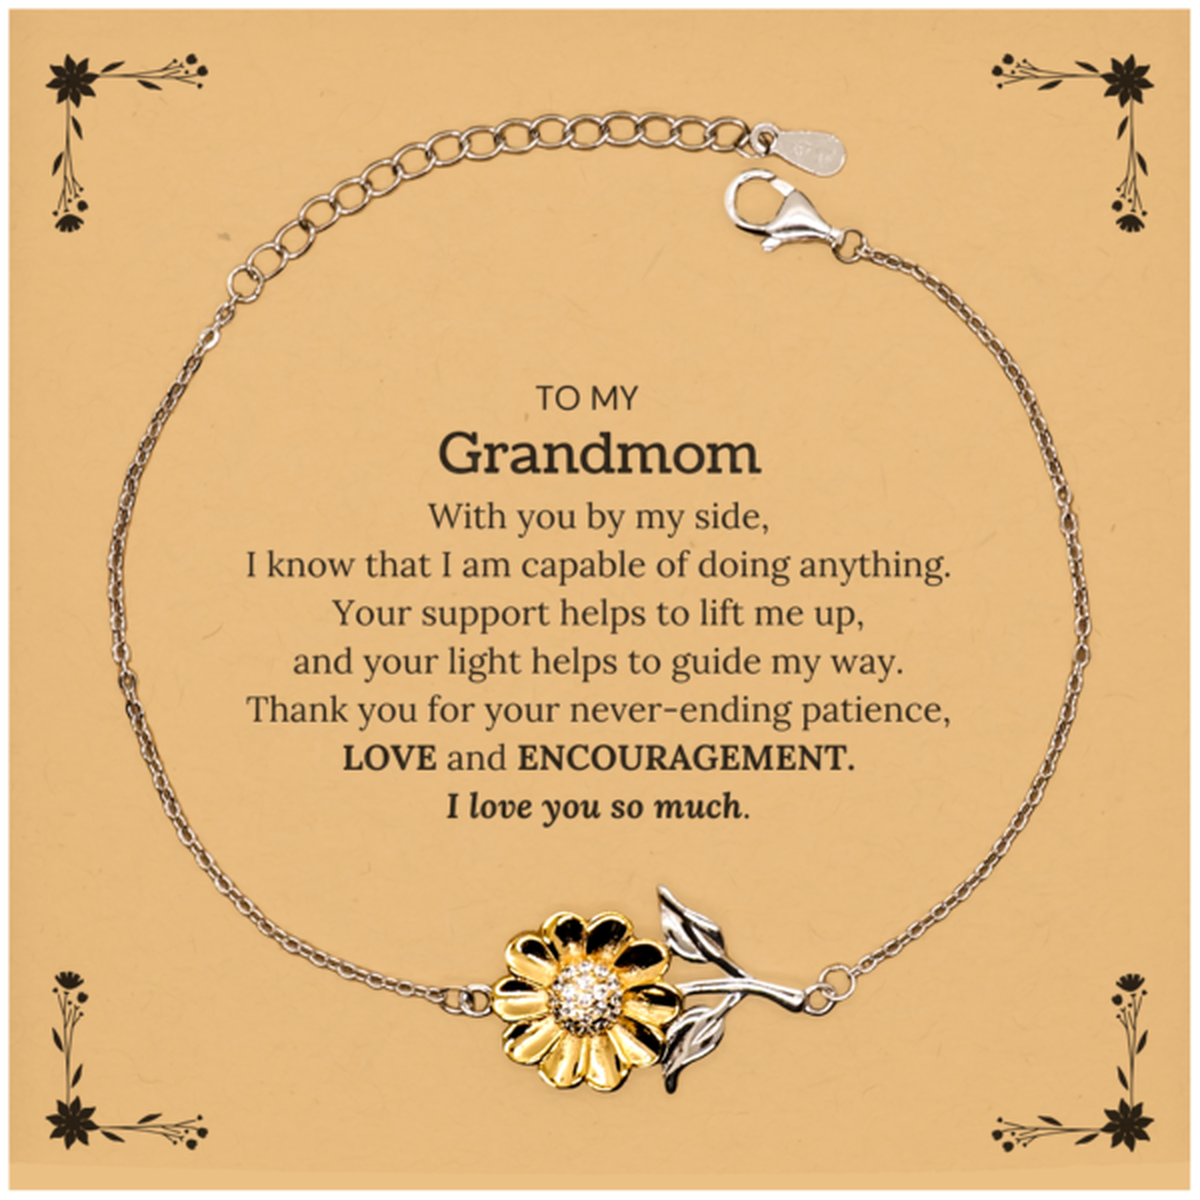 Appreciation Grandmom Sunflower Bracelet Gifts, To My Grandmom Birthday Christmas Wedding Keepsake Gifts for Grandmom With you by my side, I know that I am capable of doing anything. I love you so much